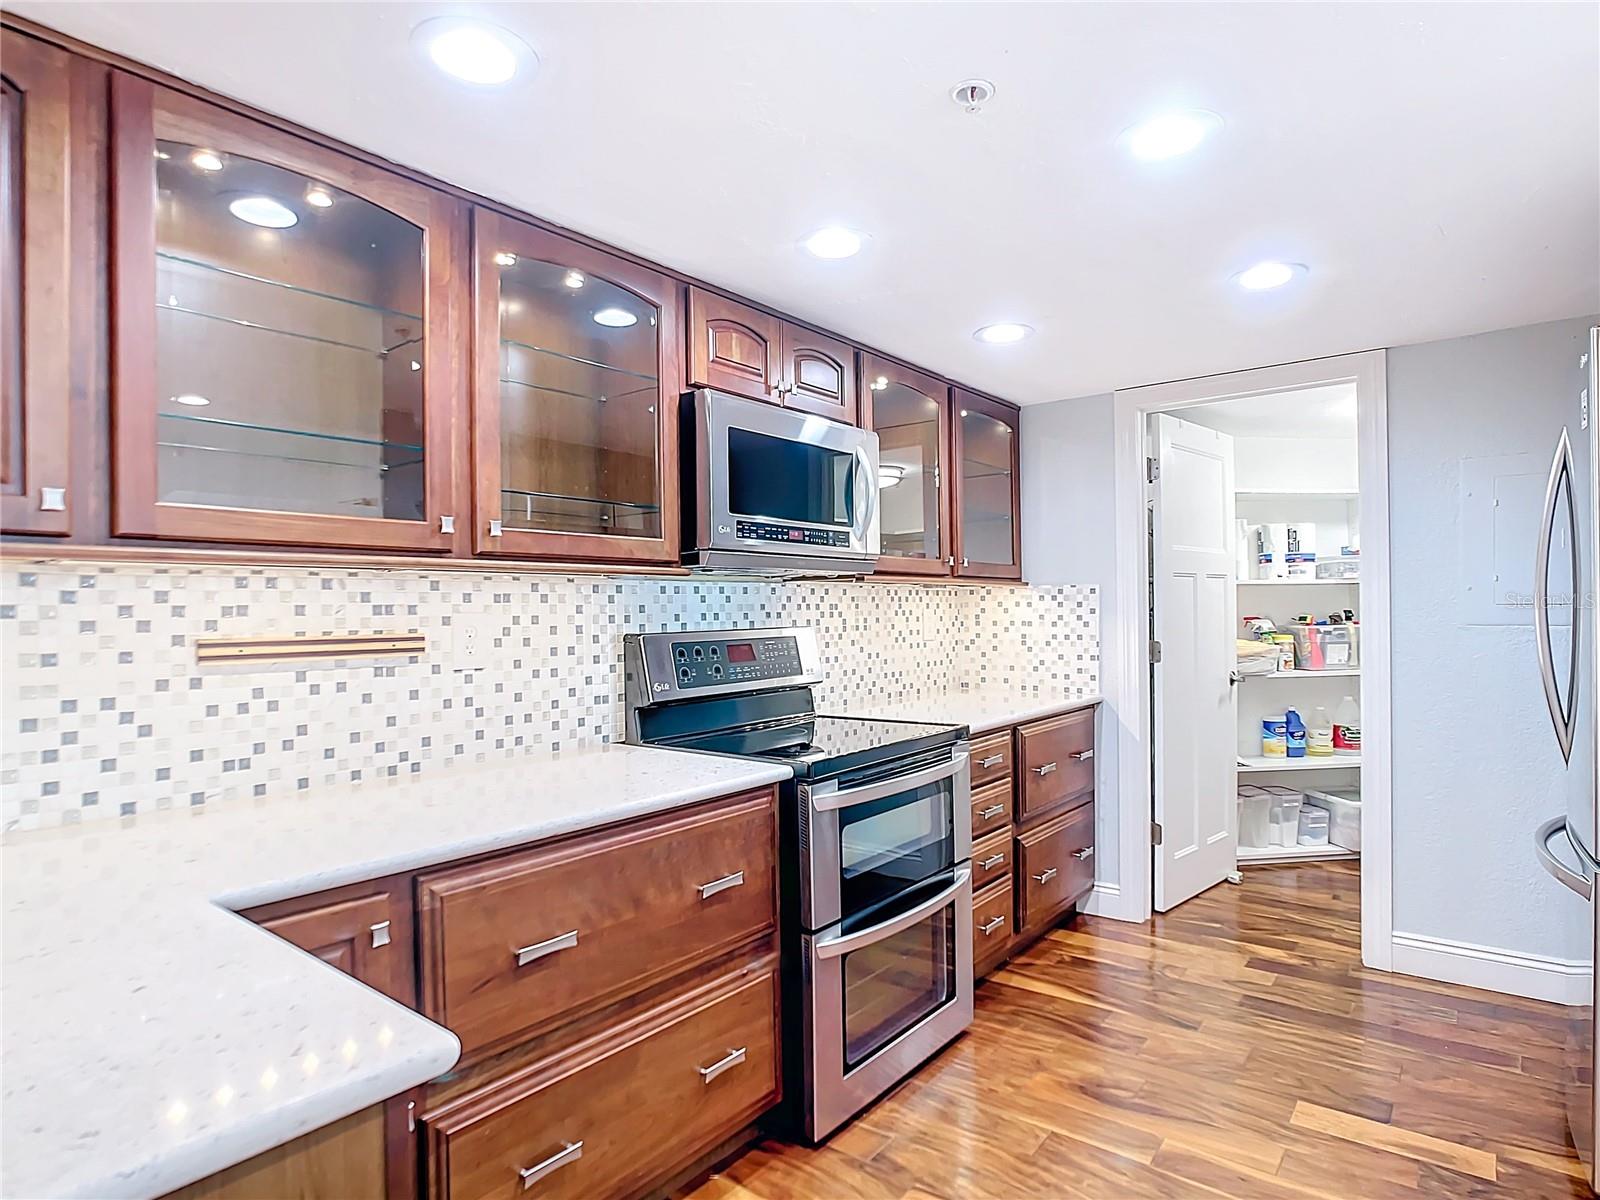 Large walk in pantry at end of kitchen. Custom cabinets that light up, soft close drawers.